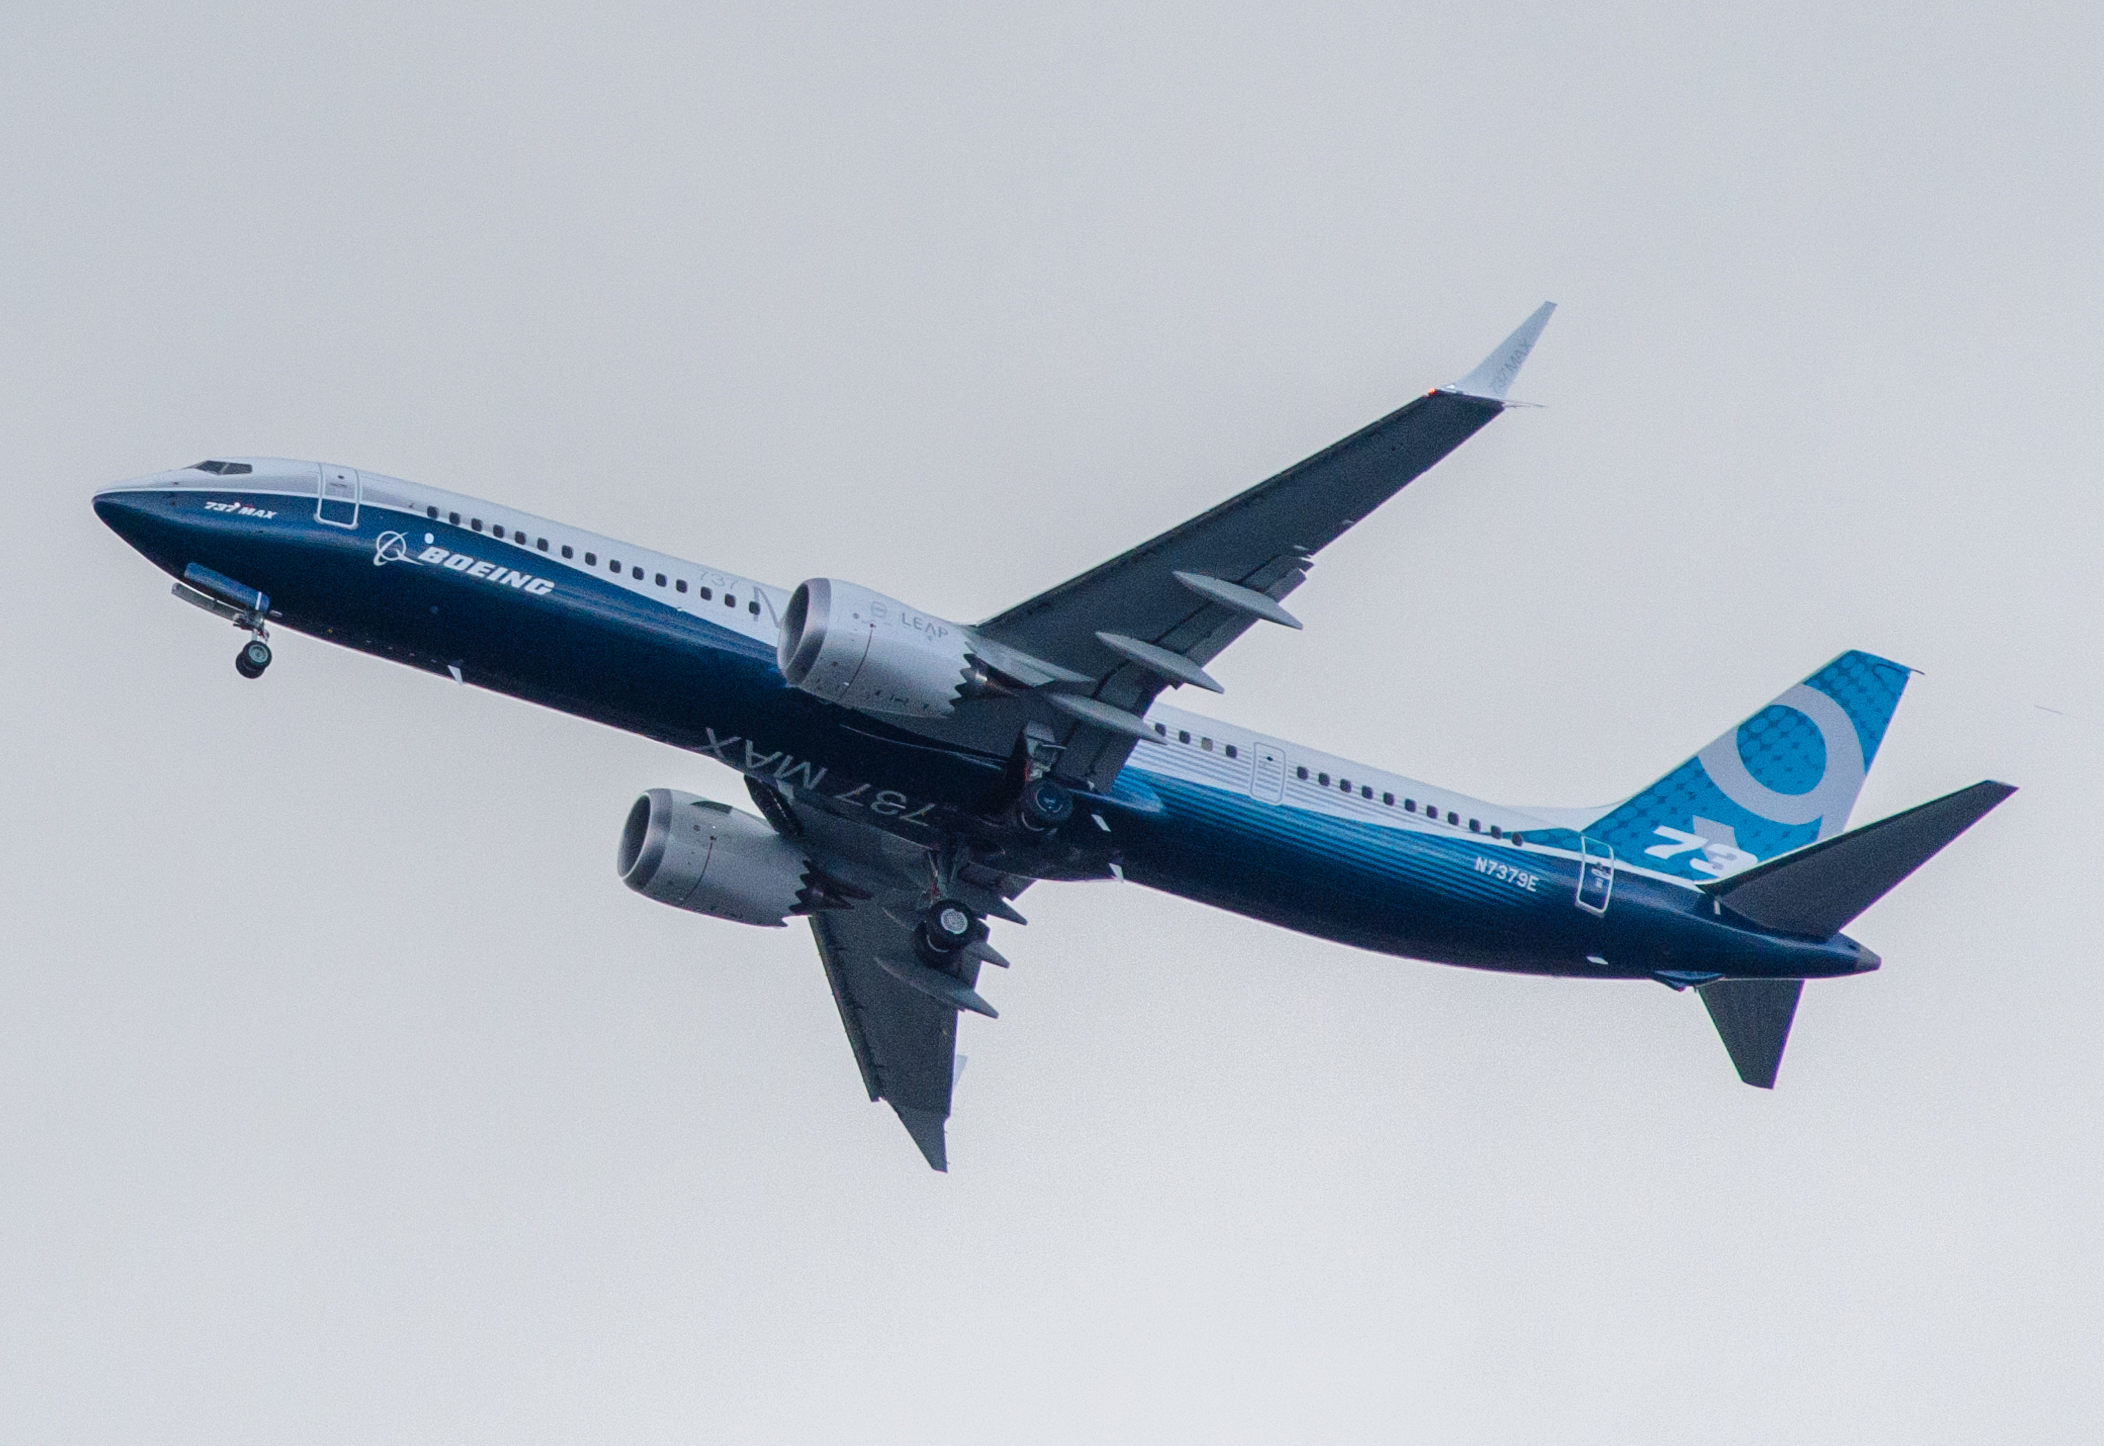 FAA did not evaluate Boeing 737 MAX independently, says source